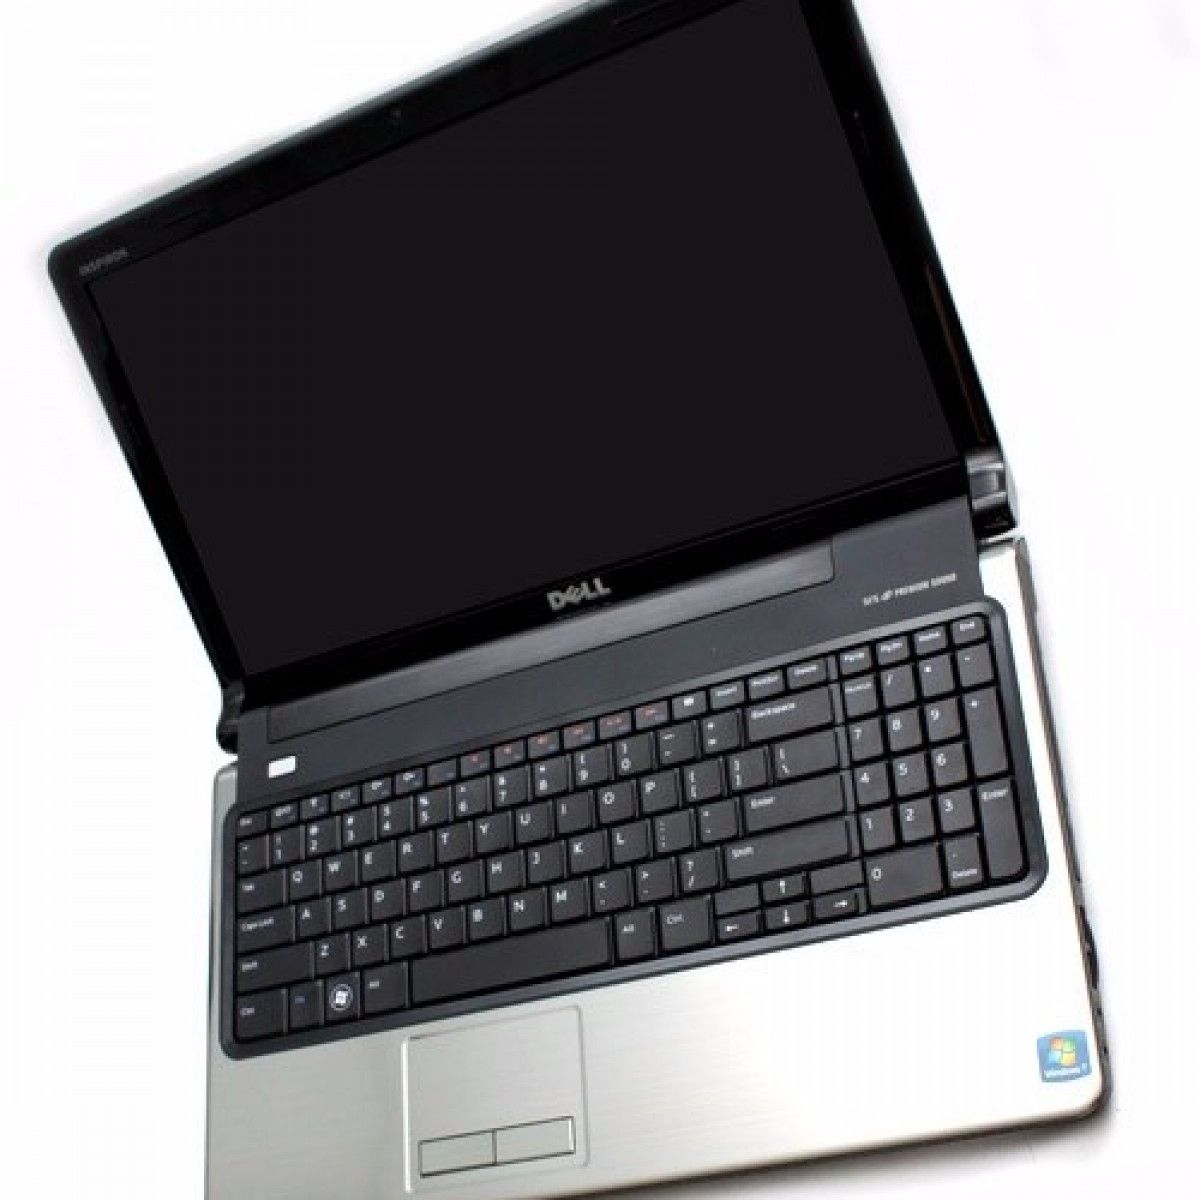 Dell inspiron 1564 drivers touchpad